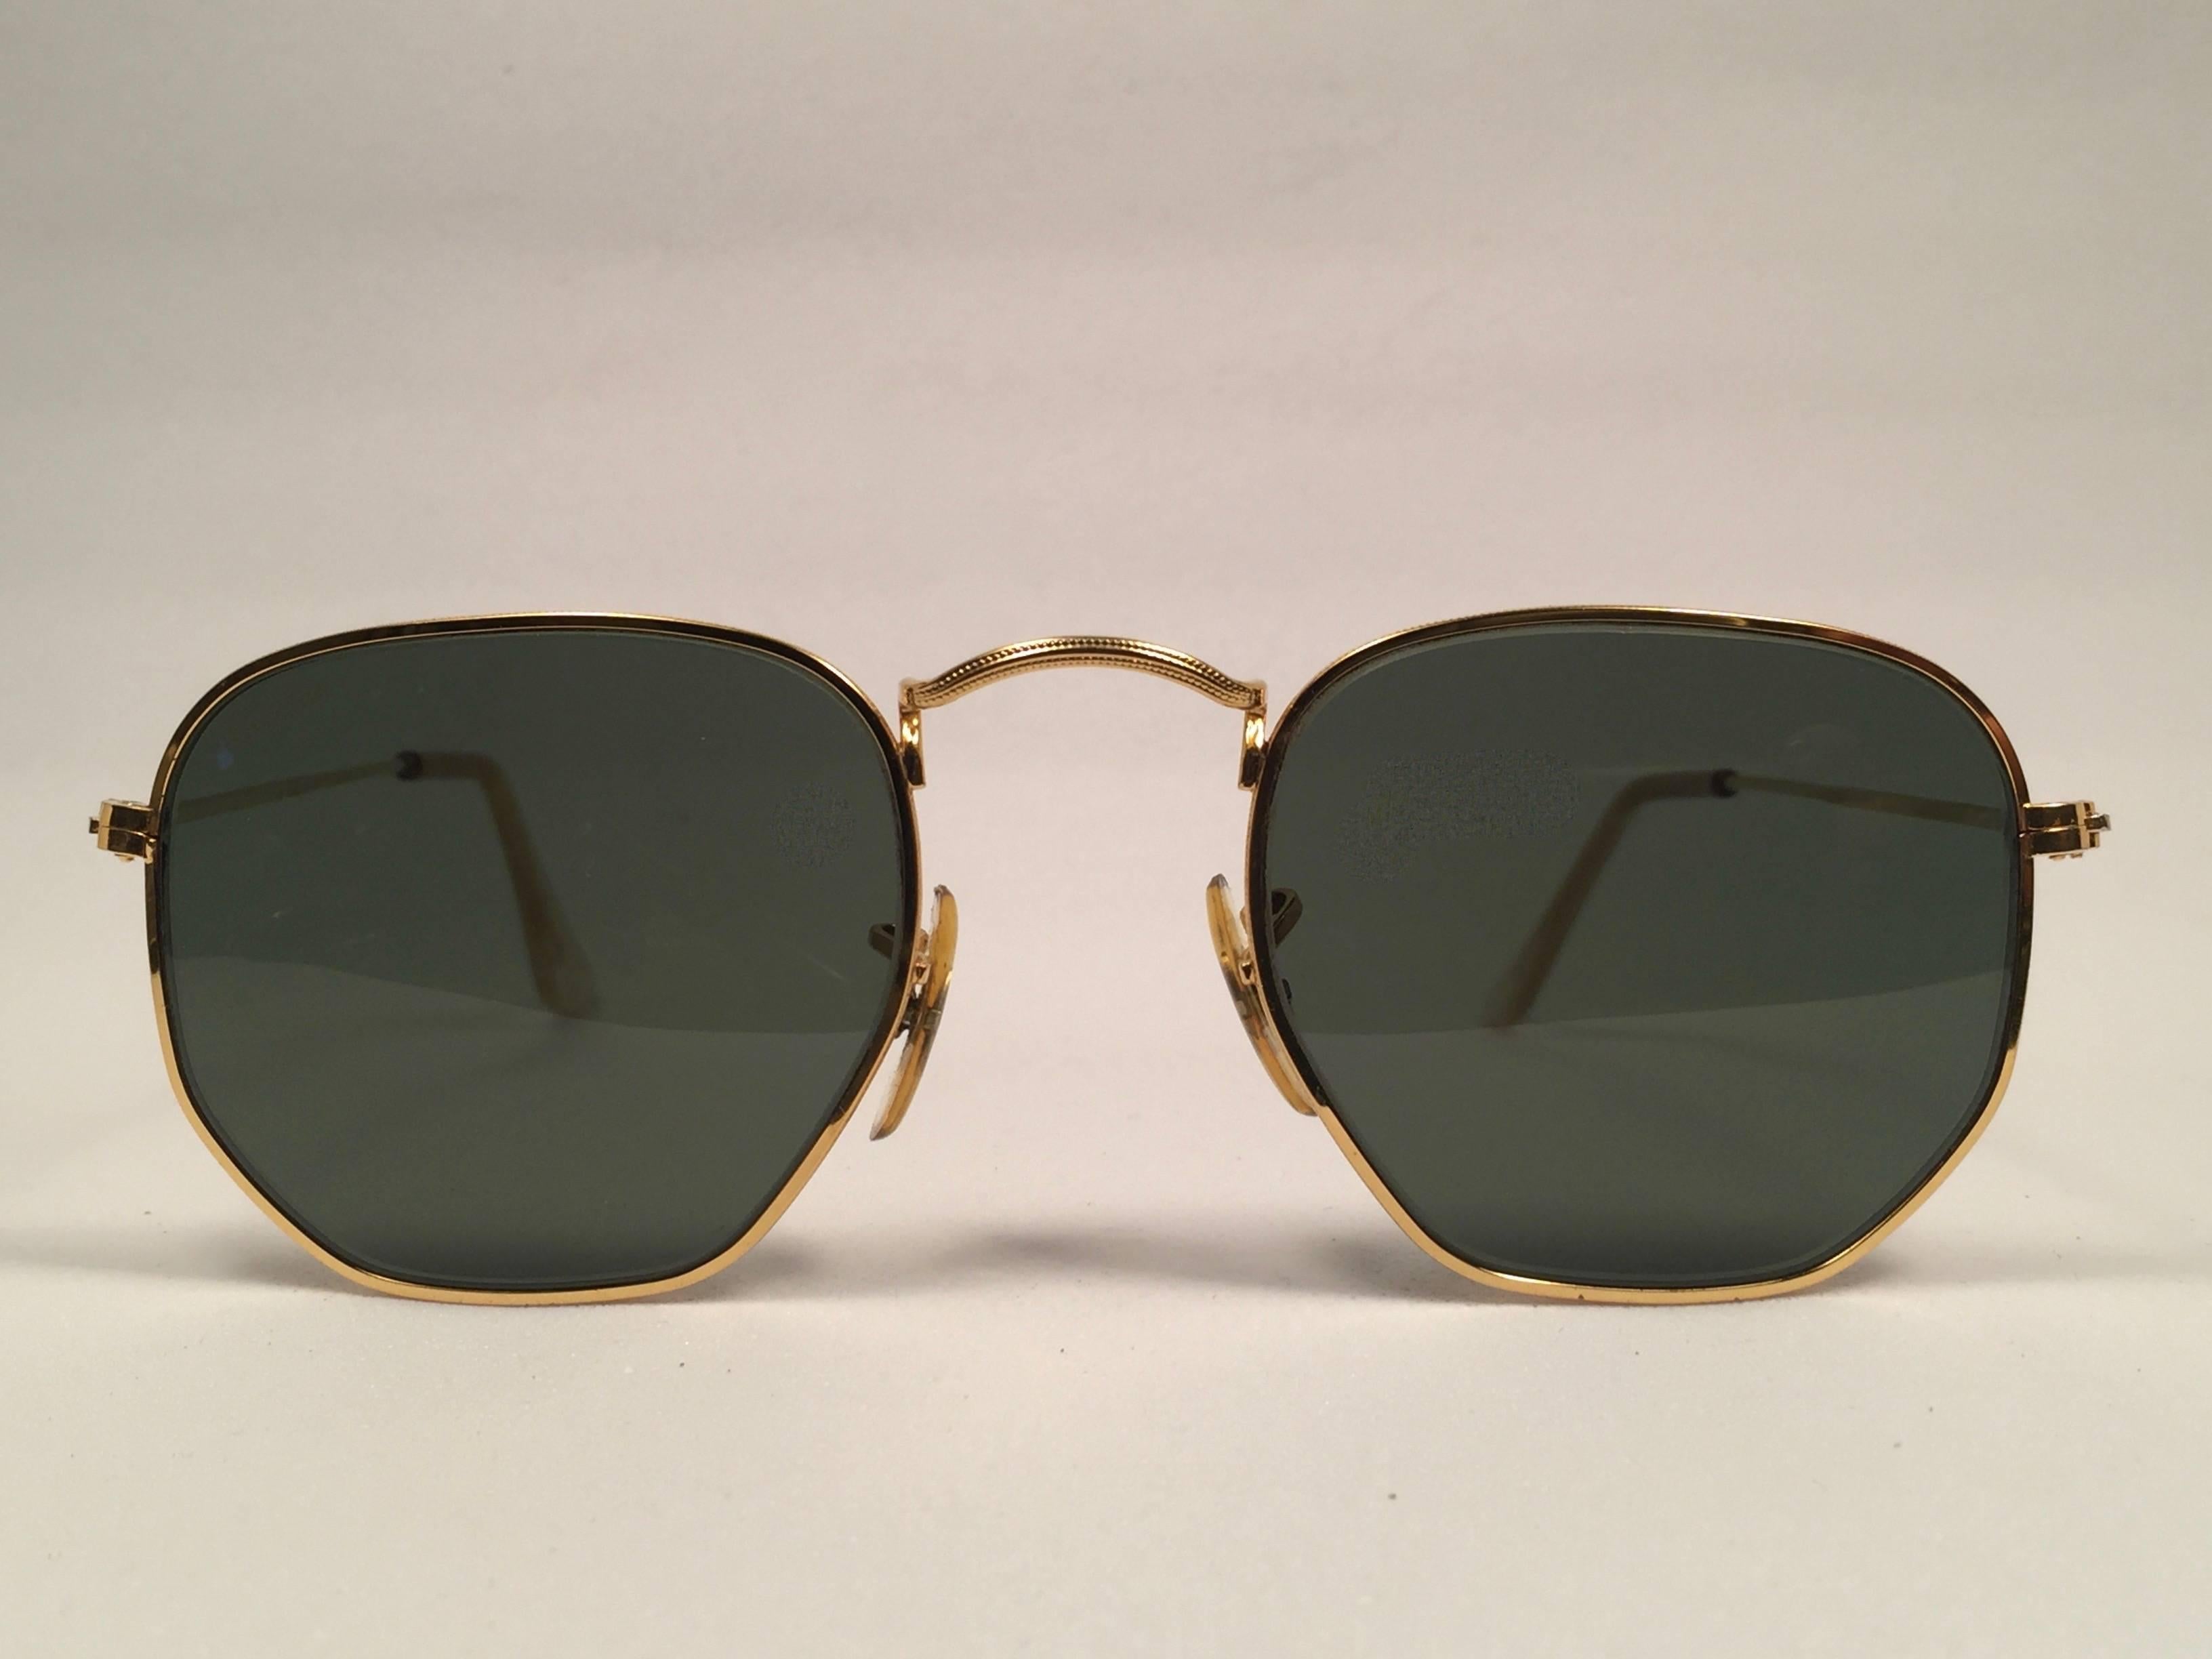 New Vintage Ray Ban classic hexagonal gold sporting G15 grey lenses.
Comes with its original Ray Ban B&L case with minor sign of wear due to storage.  


FRONT 11.5 CMS
LENS HEIGHT 4 CMS 
LENS WIDTH 4.5 CMS 